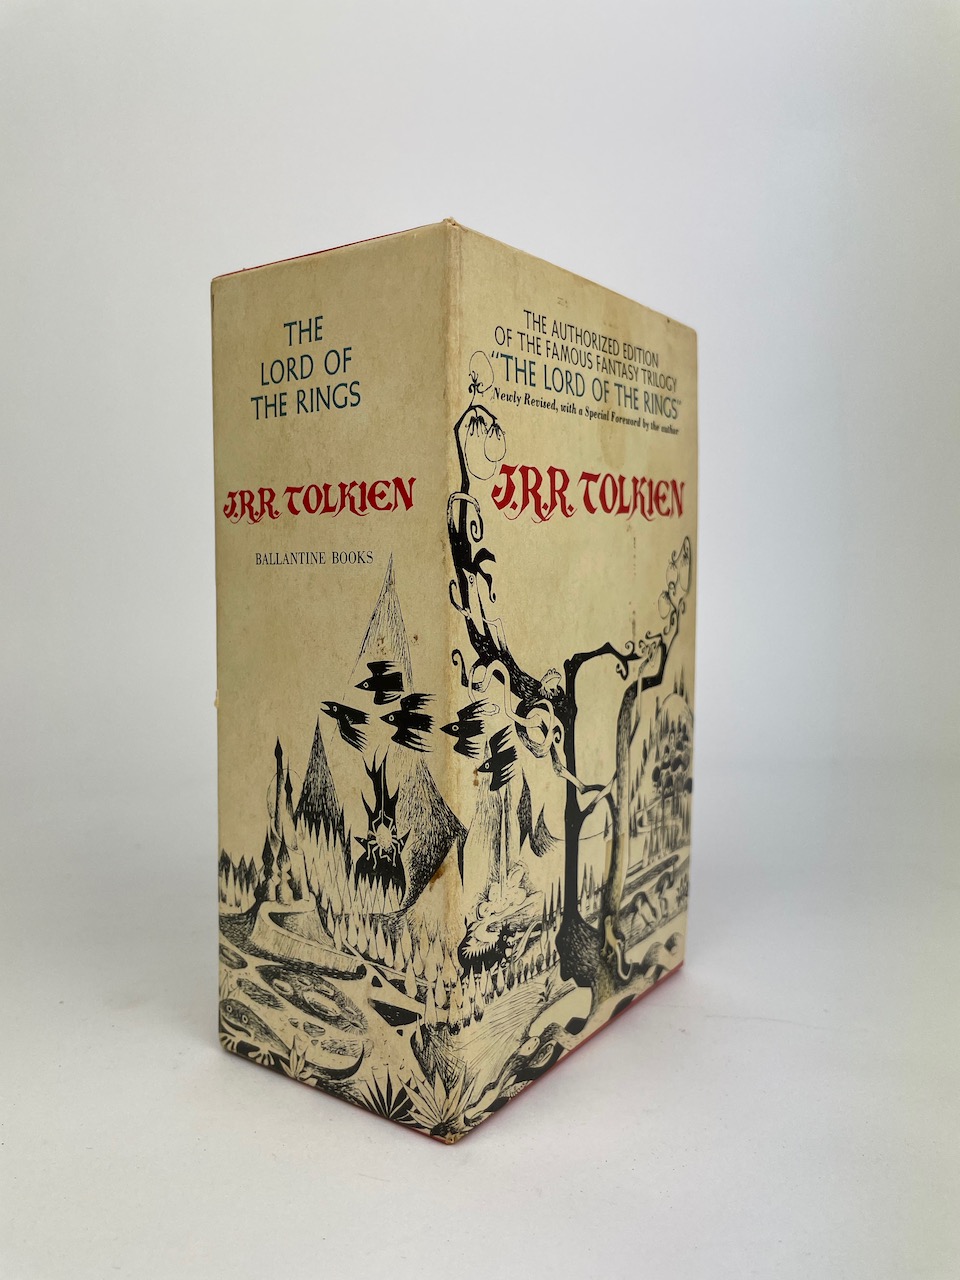 The Lord of the Rings from 1968, Authorized Edition in Black, White and Red Publishers Slipcase